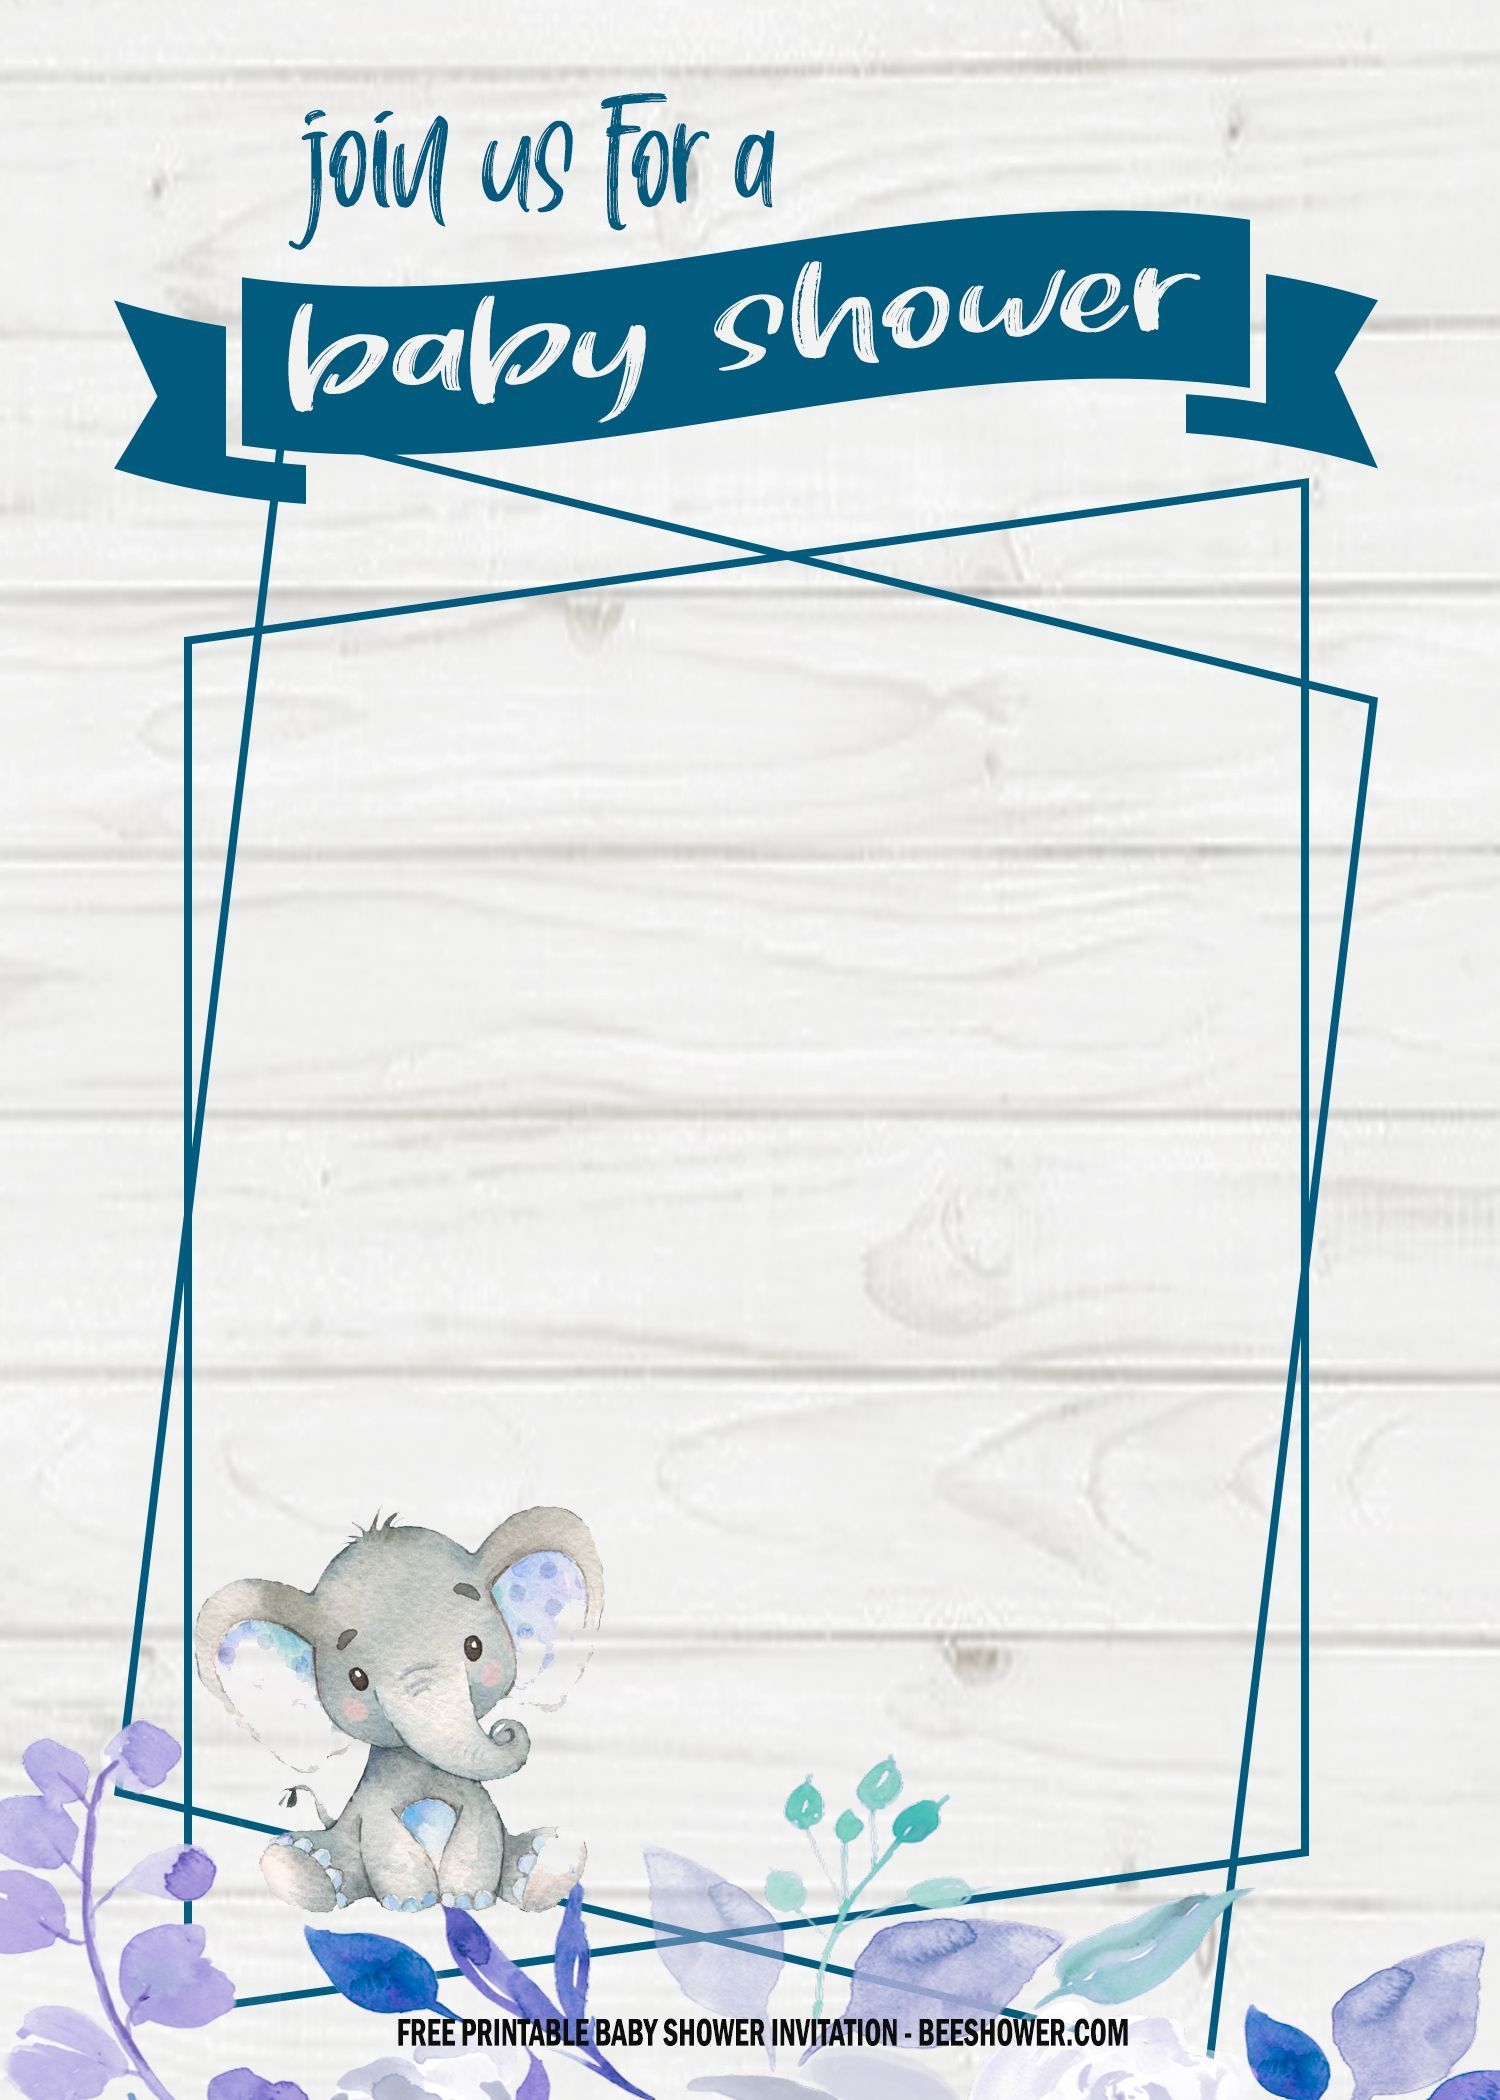 6 FREE Blue Elephant Themed Birthday And Baby Shower Invitation Templates Free Baby Shower Invitations Elephant Baby Shower Invitations Boy Boy Baby Shower Invitations Templates - Free Printable Baby Shower Invitations Templates For Boys